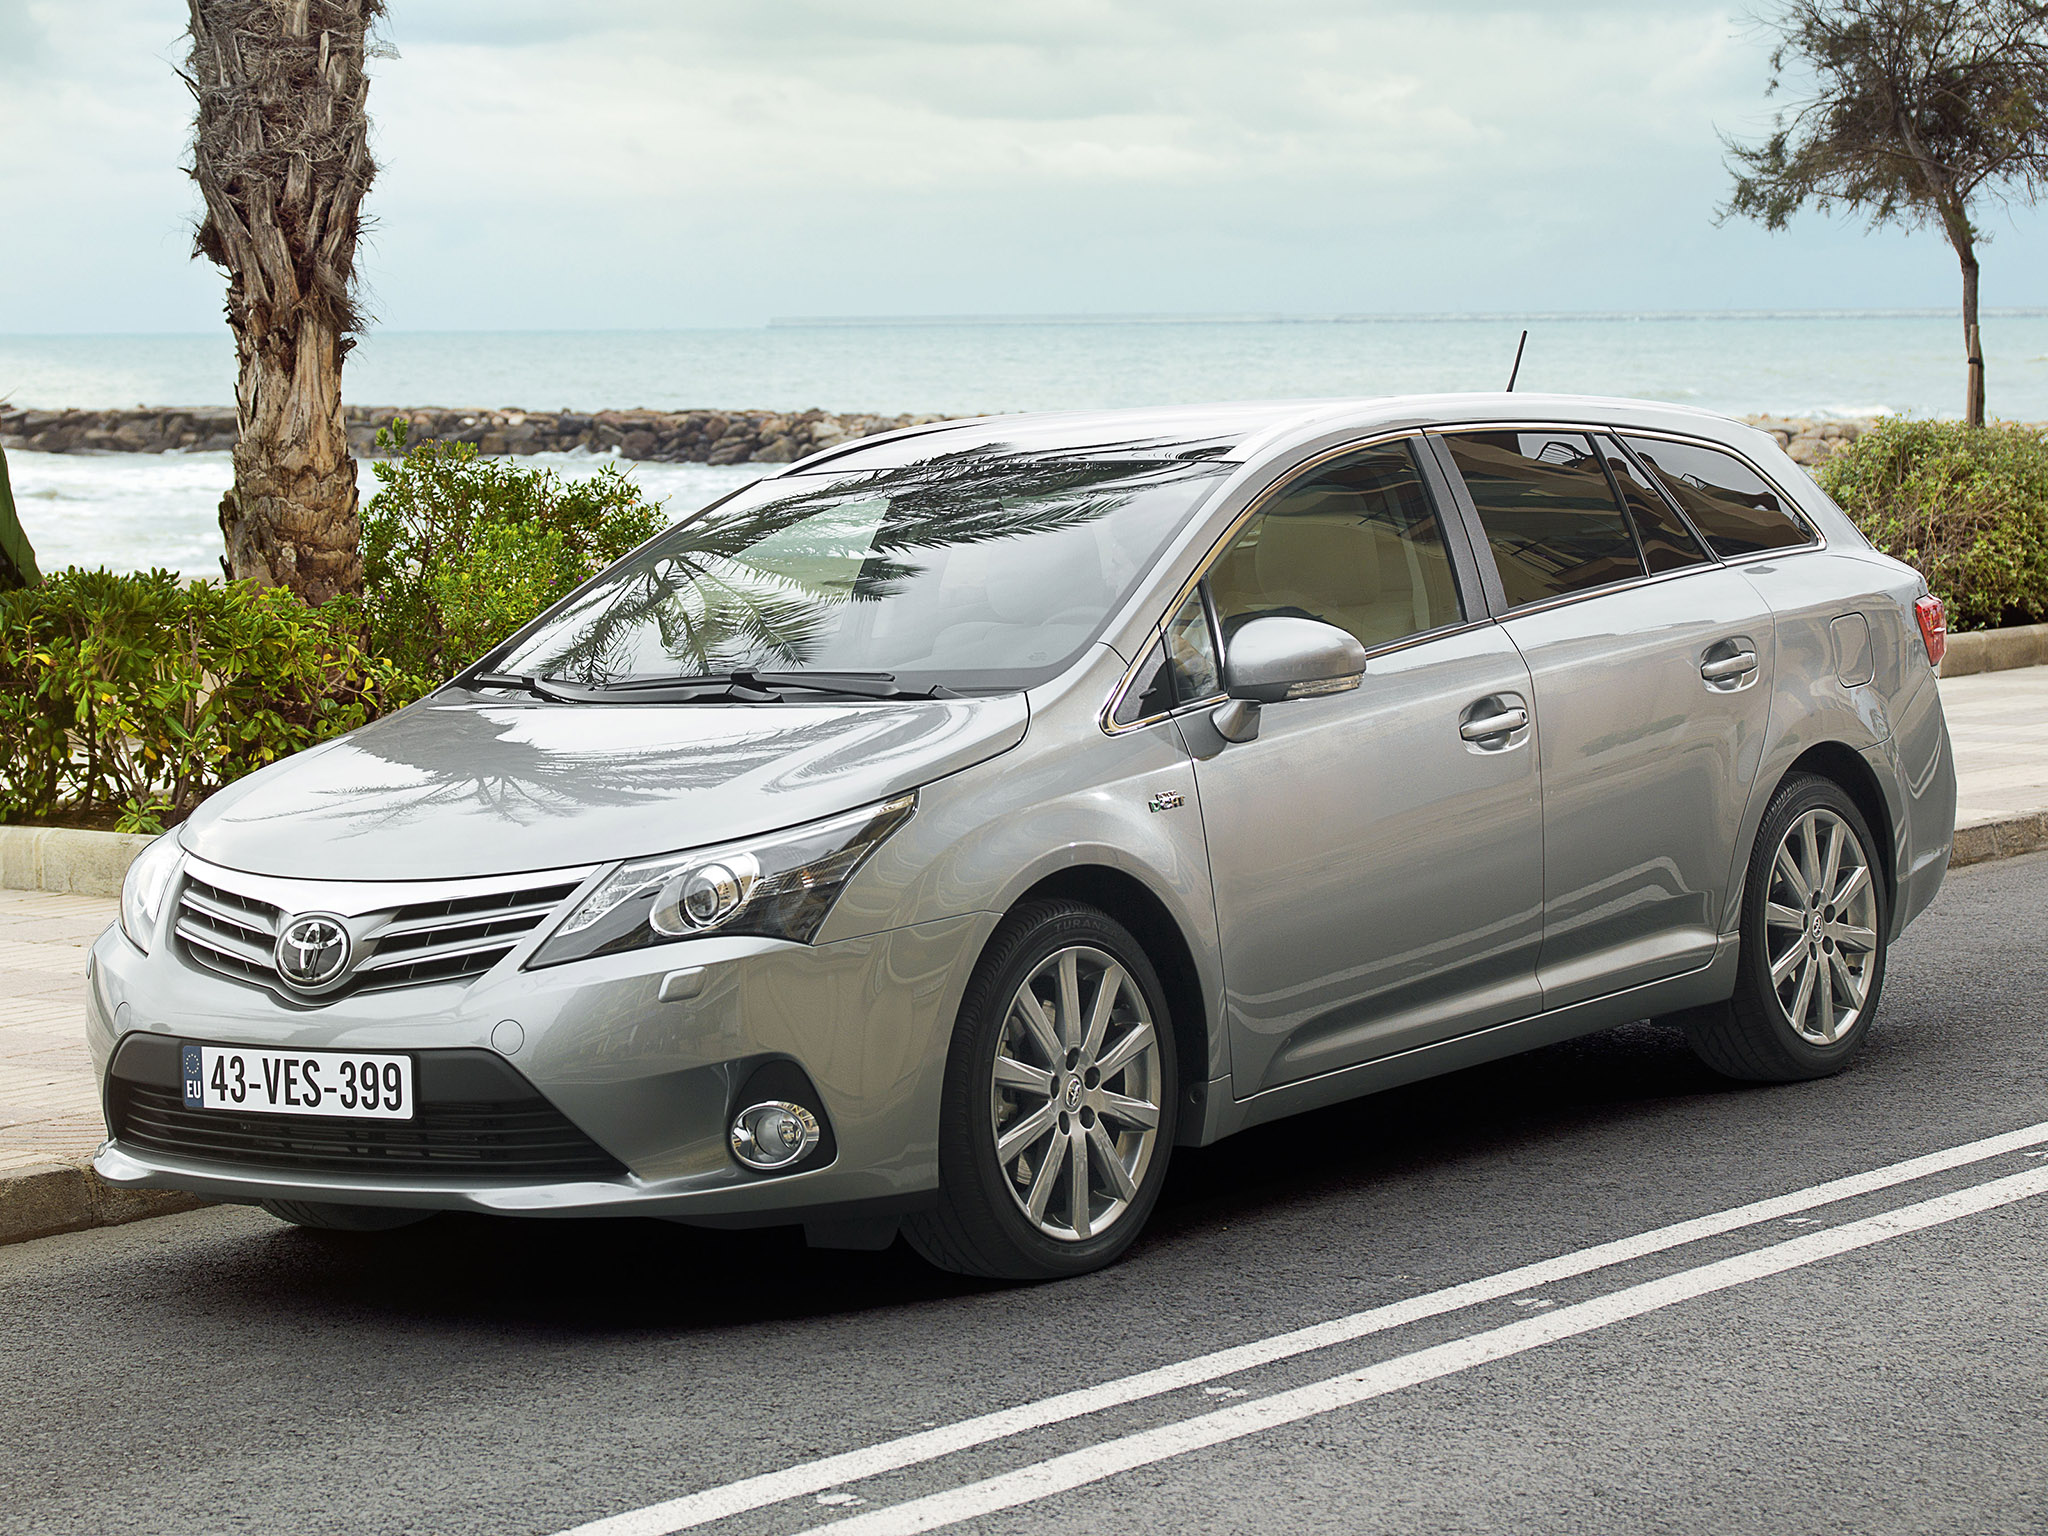 Car in pictures car photo gallery » Toyota Avensis Wagon